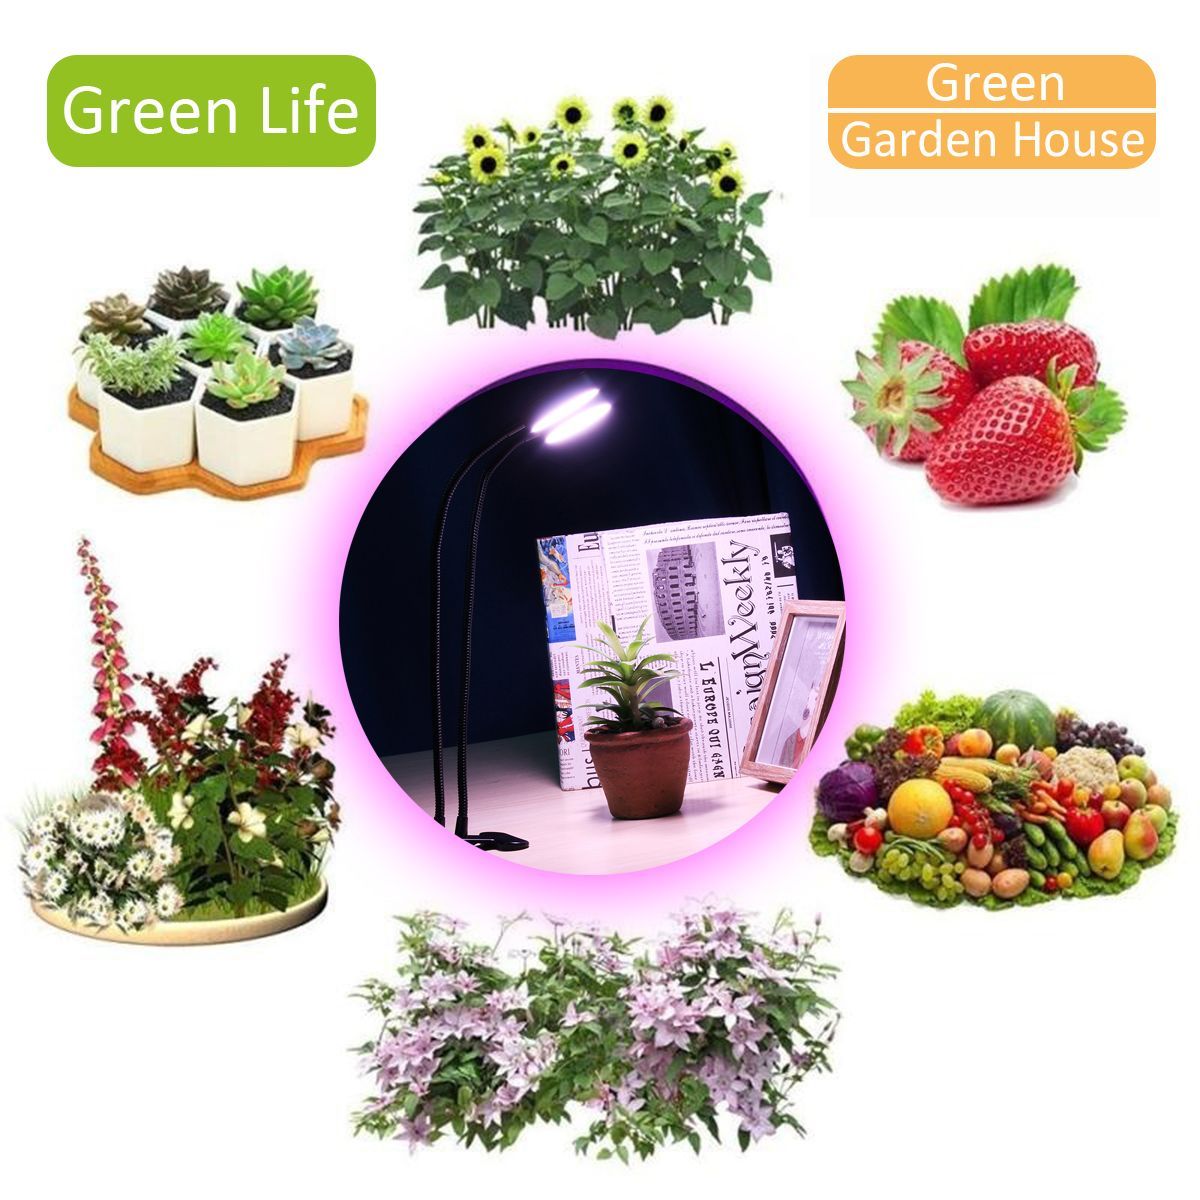 Clip-Plant-Fill-Light-LED-Grow-Light-Fleshy-Planting-Double-Head-Timing-With-Clips-Like-Sun-1388863